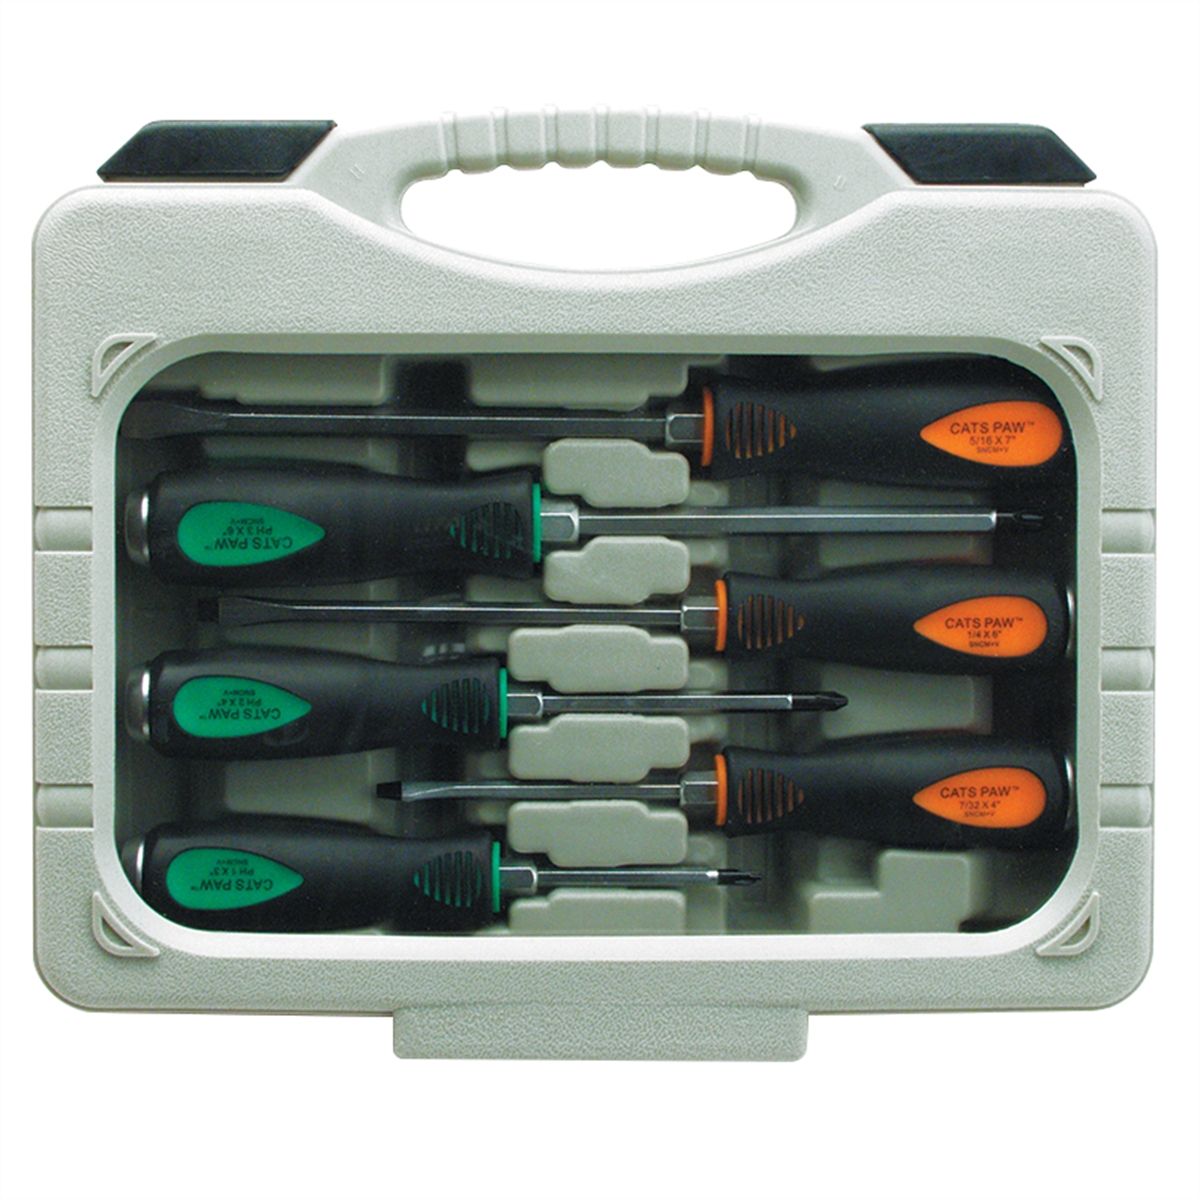 Cats Paw Capped End Screwdriver Set - 6-Pc